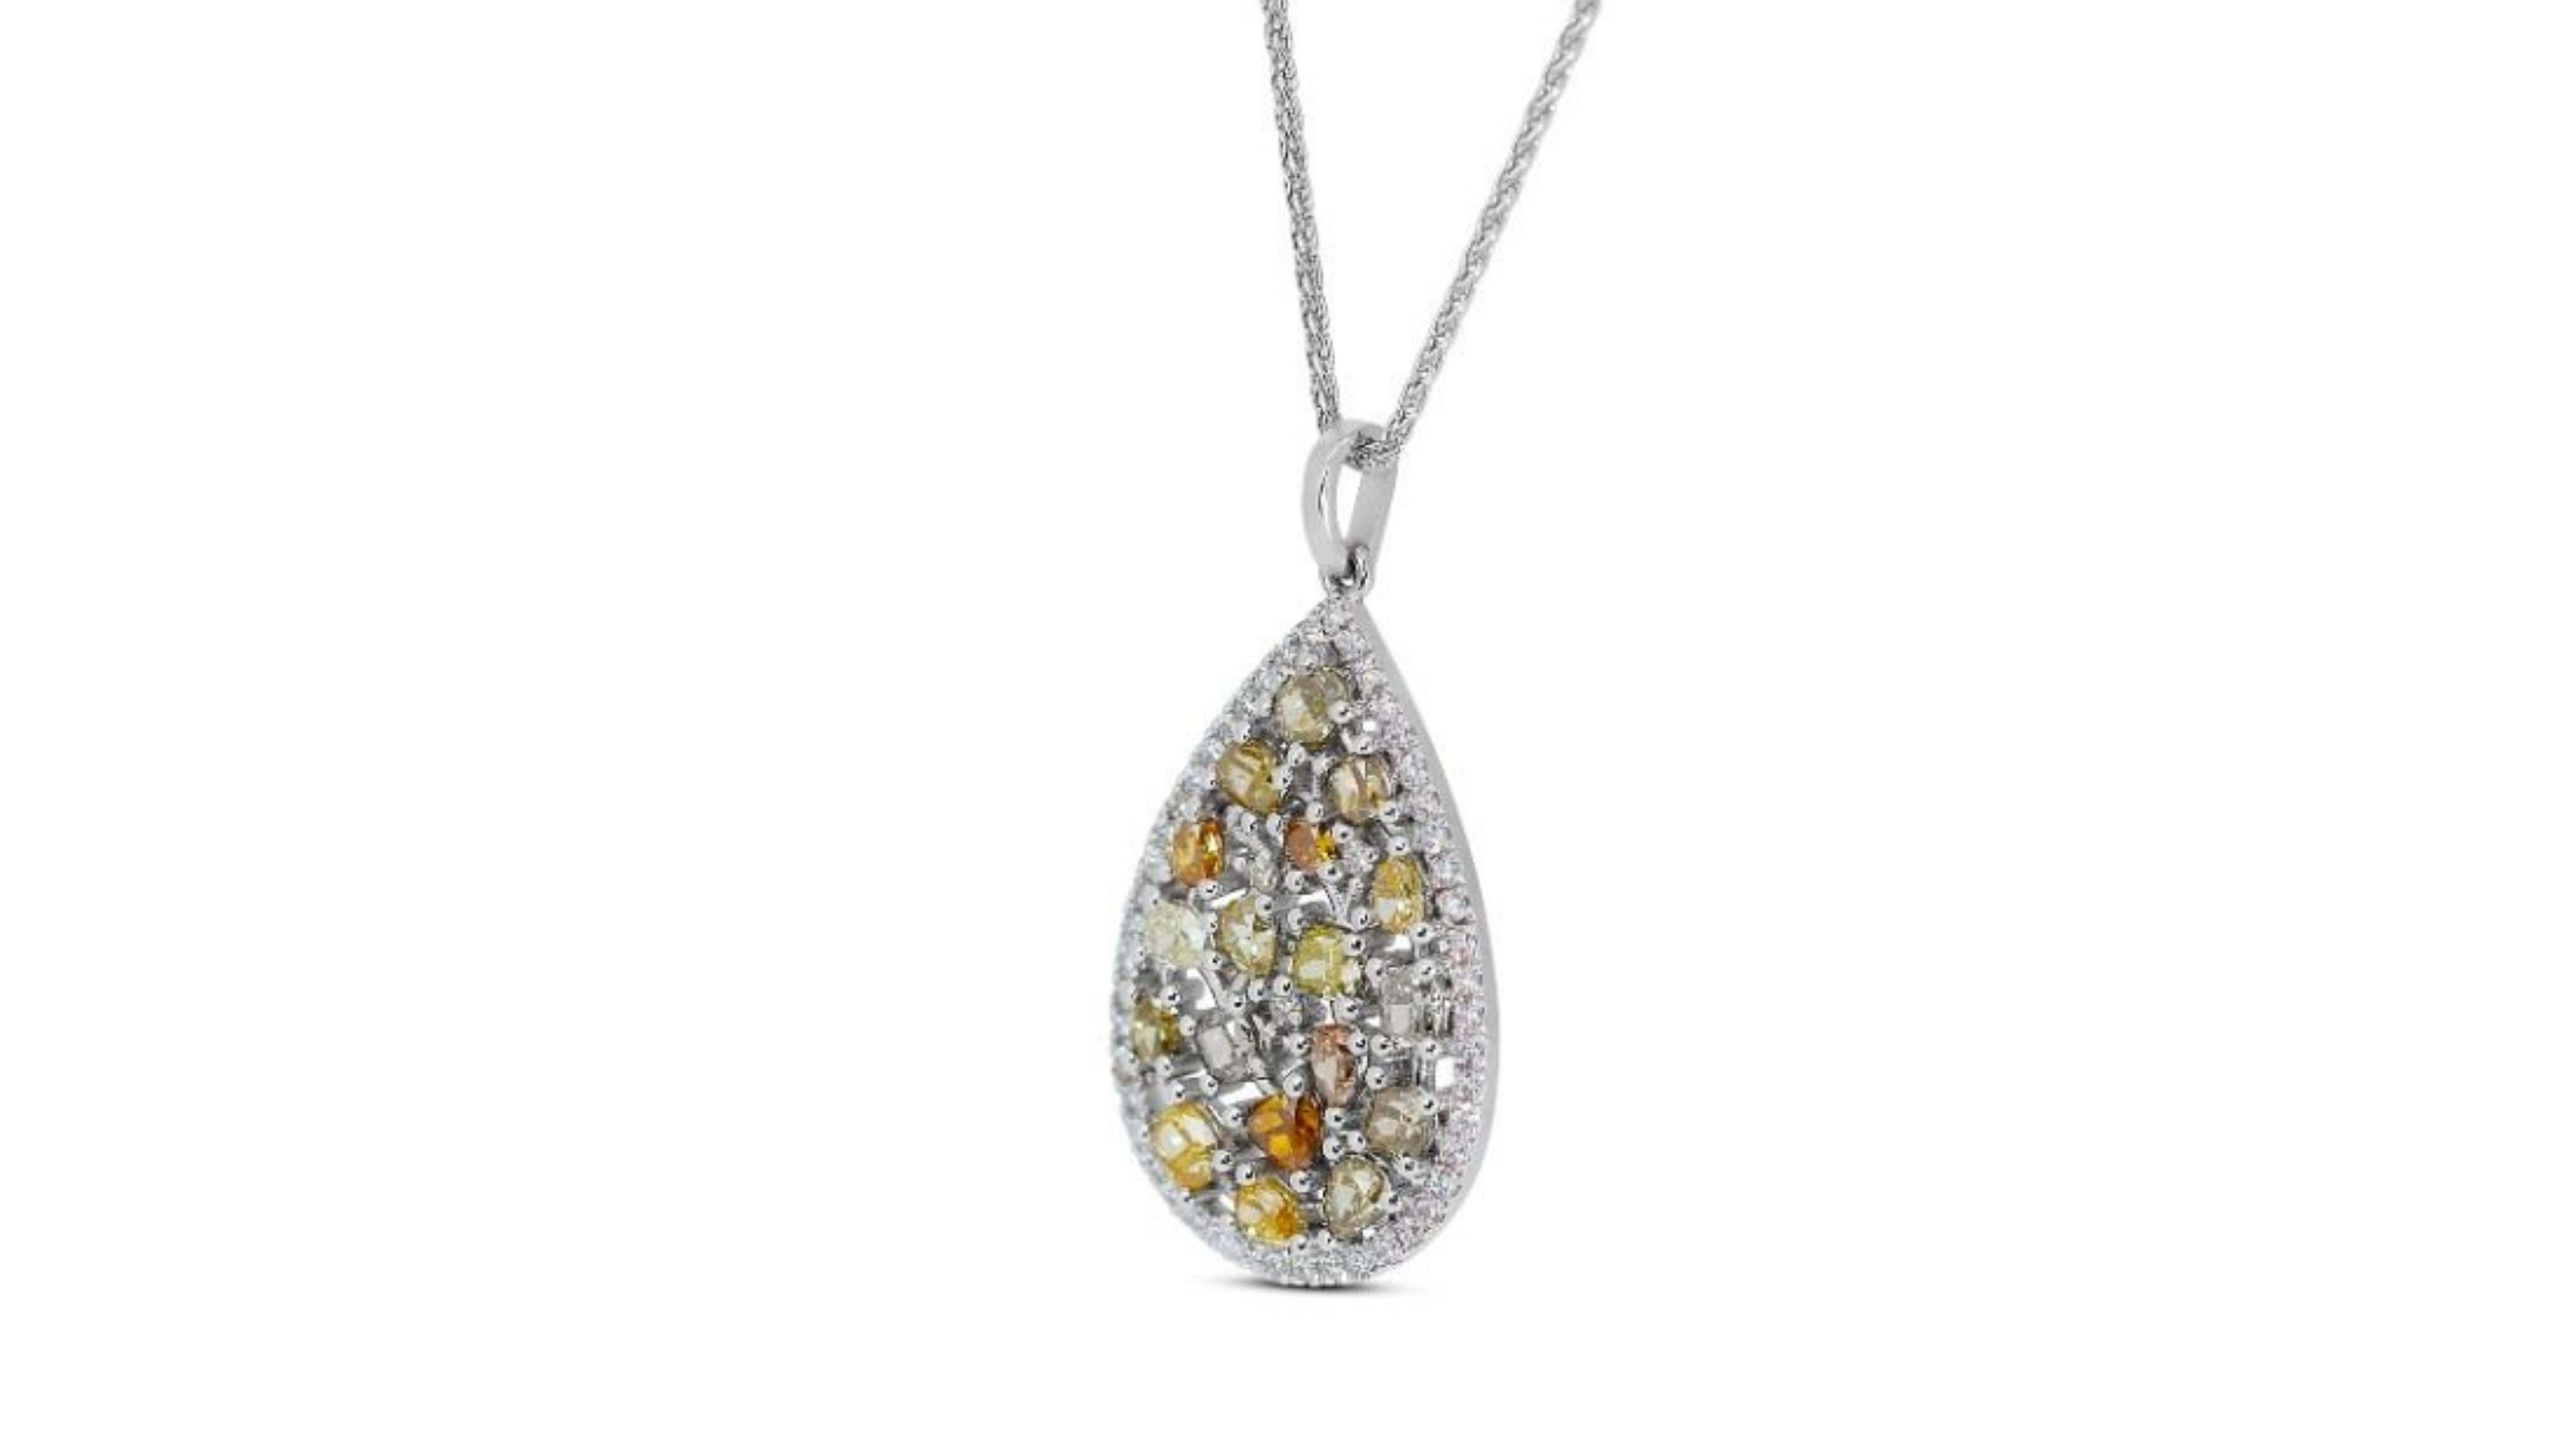 Women's Glamorous 2.17ct. Mixed Cut Stud Diamond Necklace For Sale